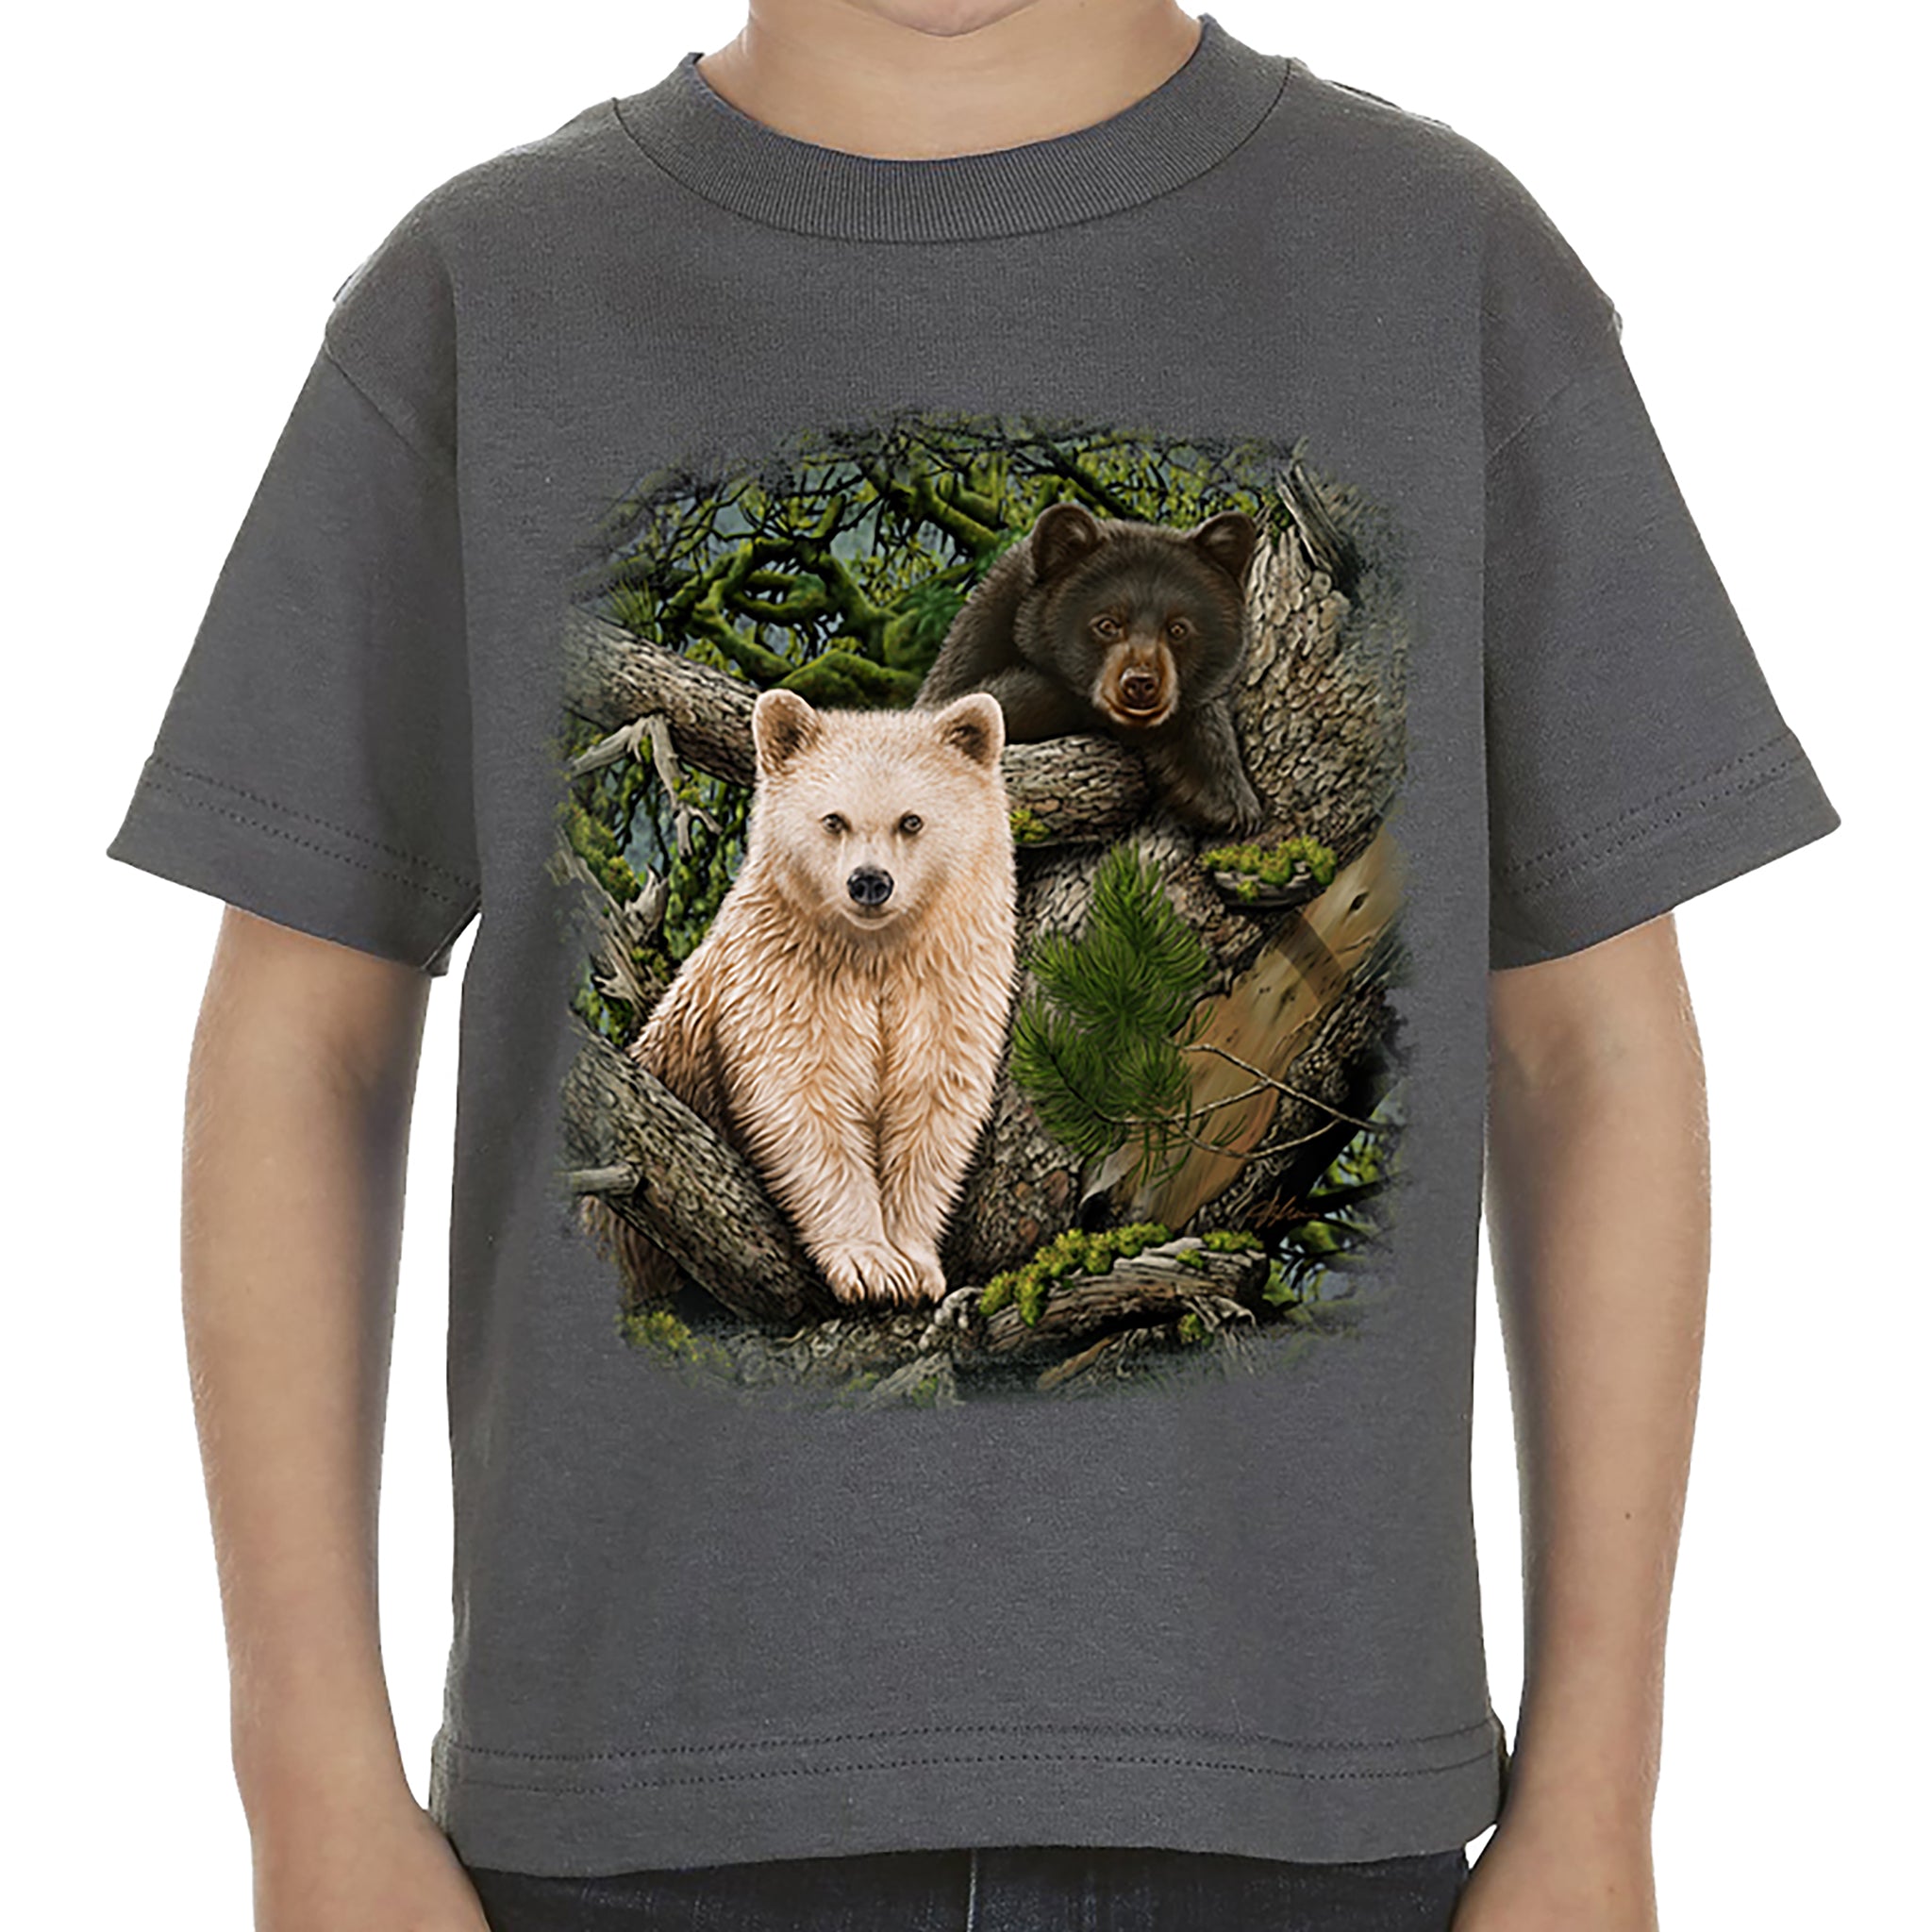 Kermode Brothers Child tee- Charcoal heather t-shirt with bear cub nature art